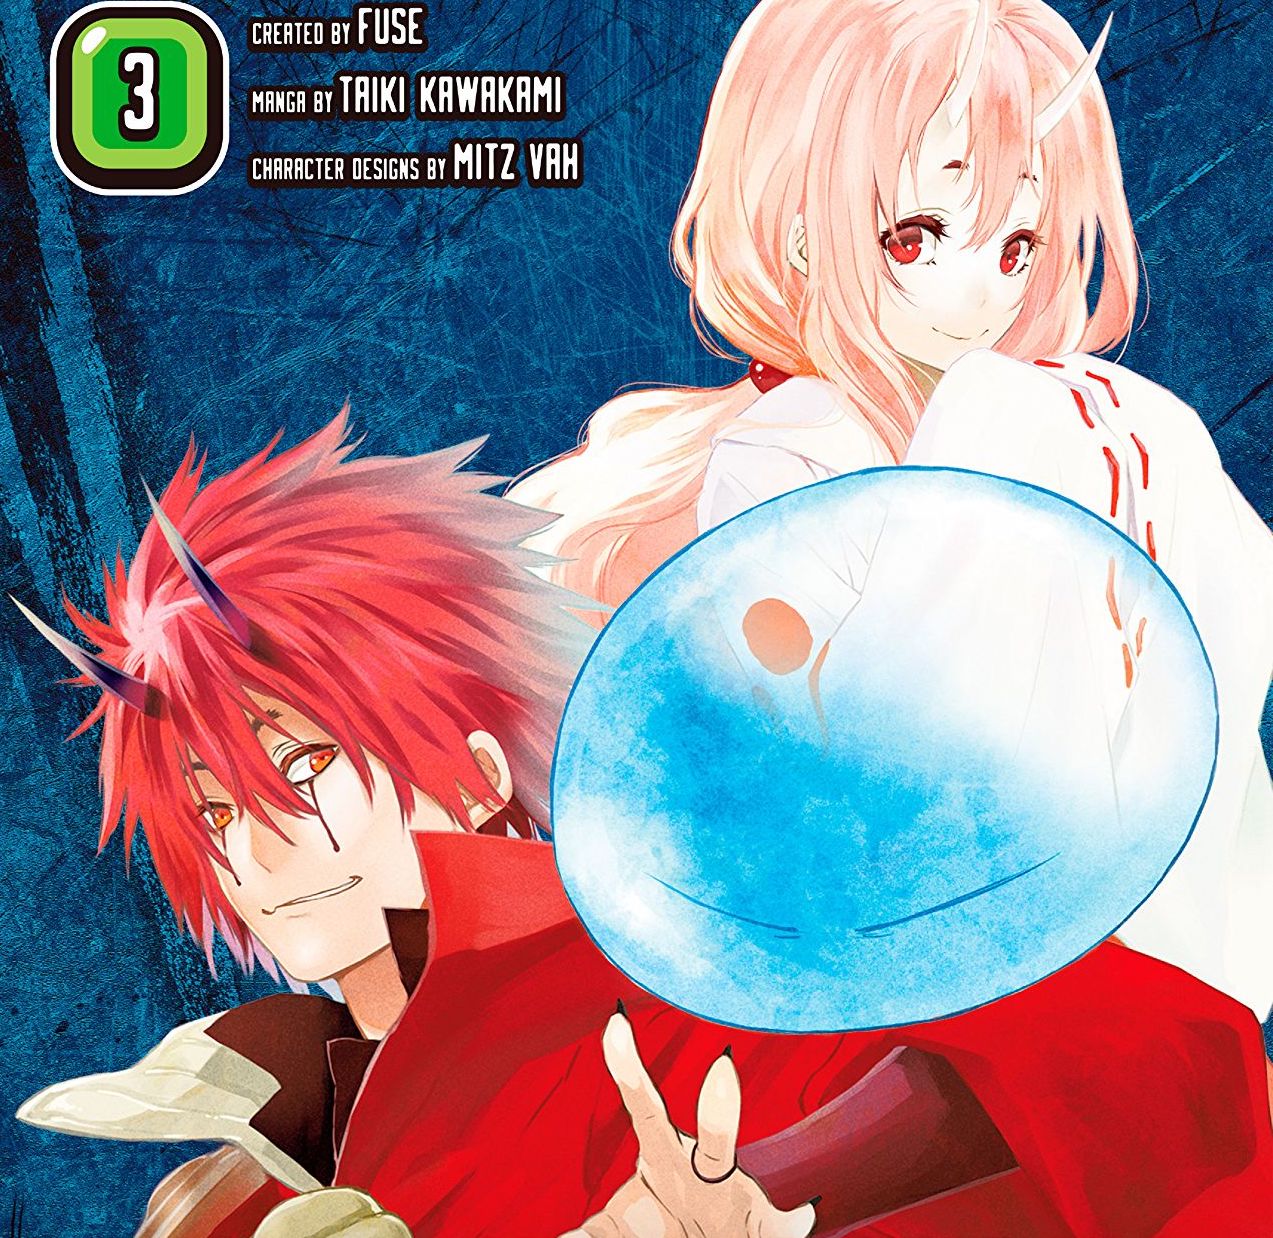 That Time I Got Reincarnated As A Slime Vol. 3 Review